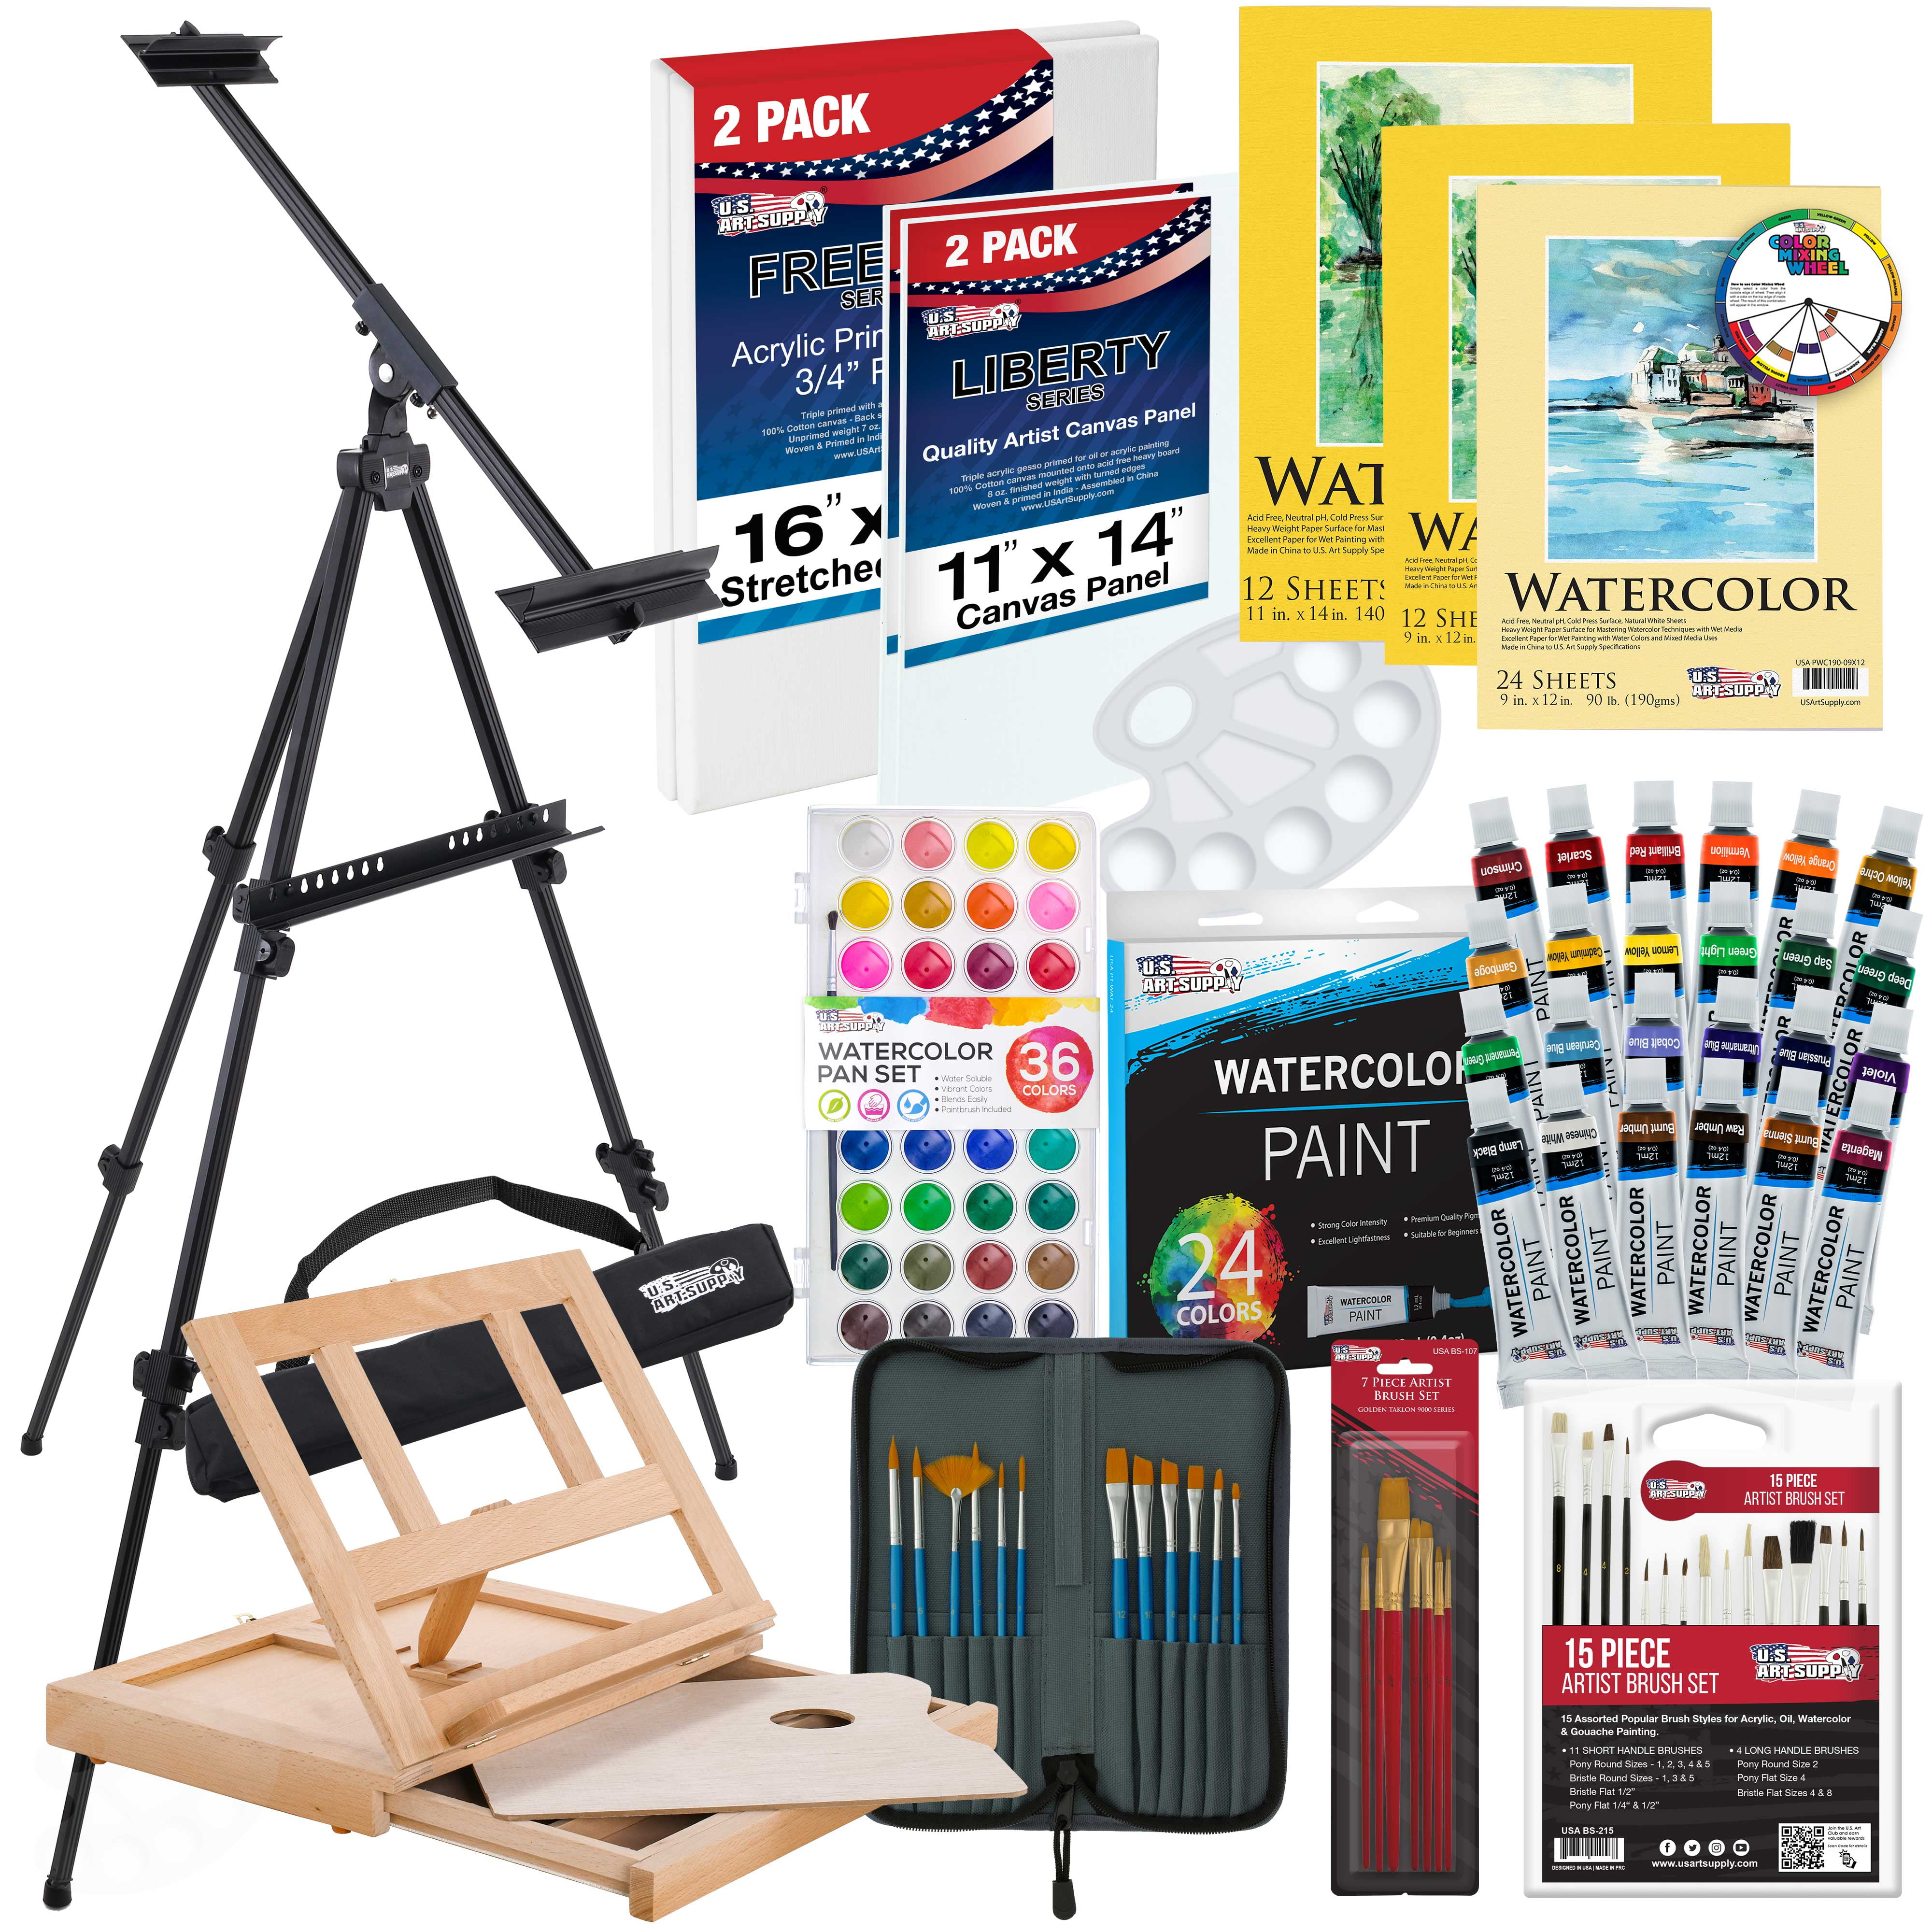 US Art Supply 62-Piece Wood Box Easel Painting Set- Box Easel, Acrylic & Oil Paint Colors